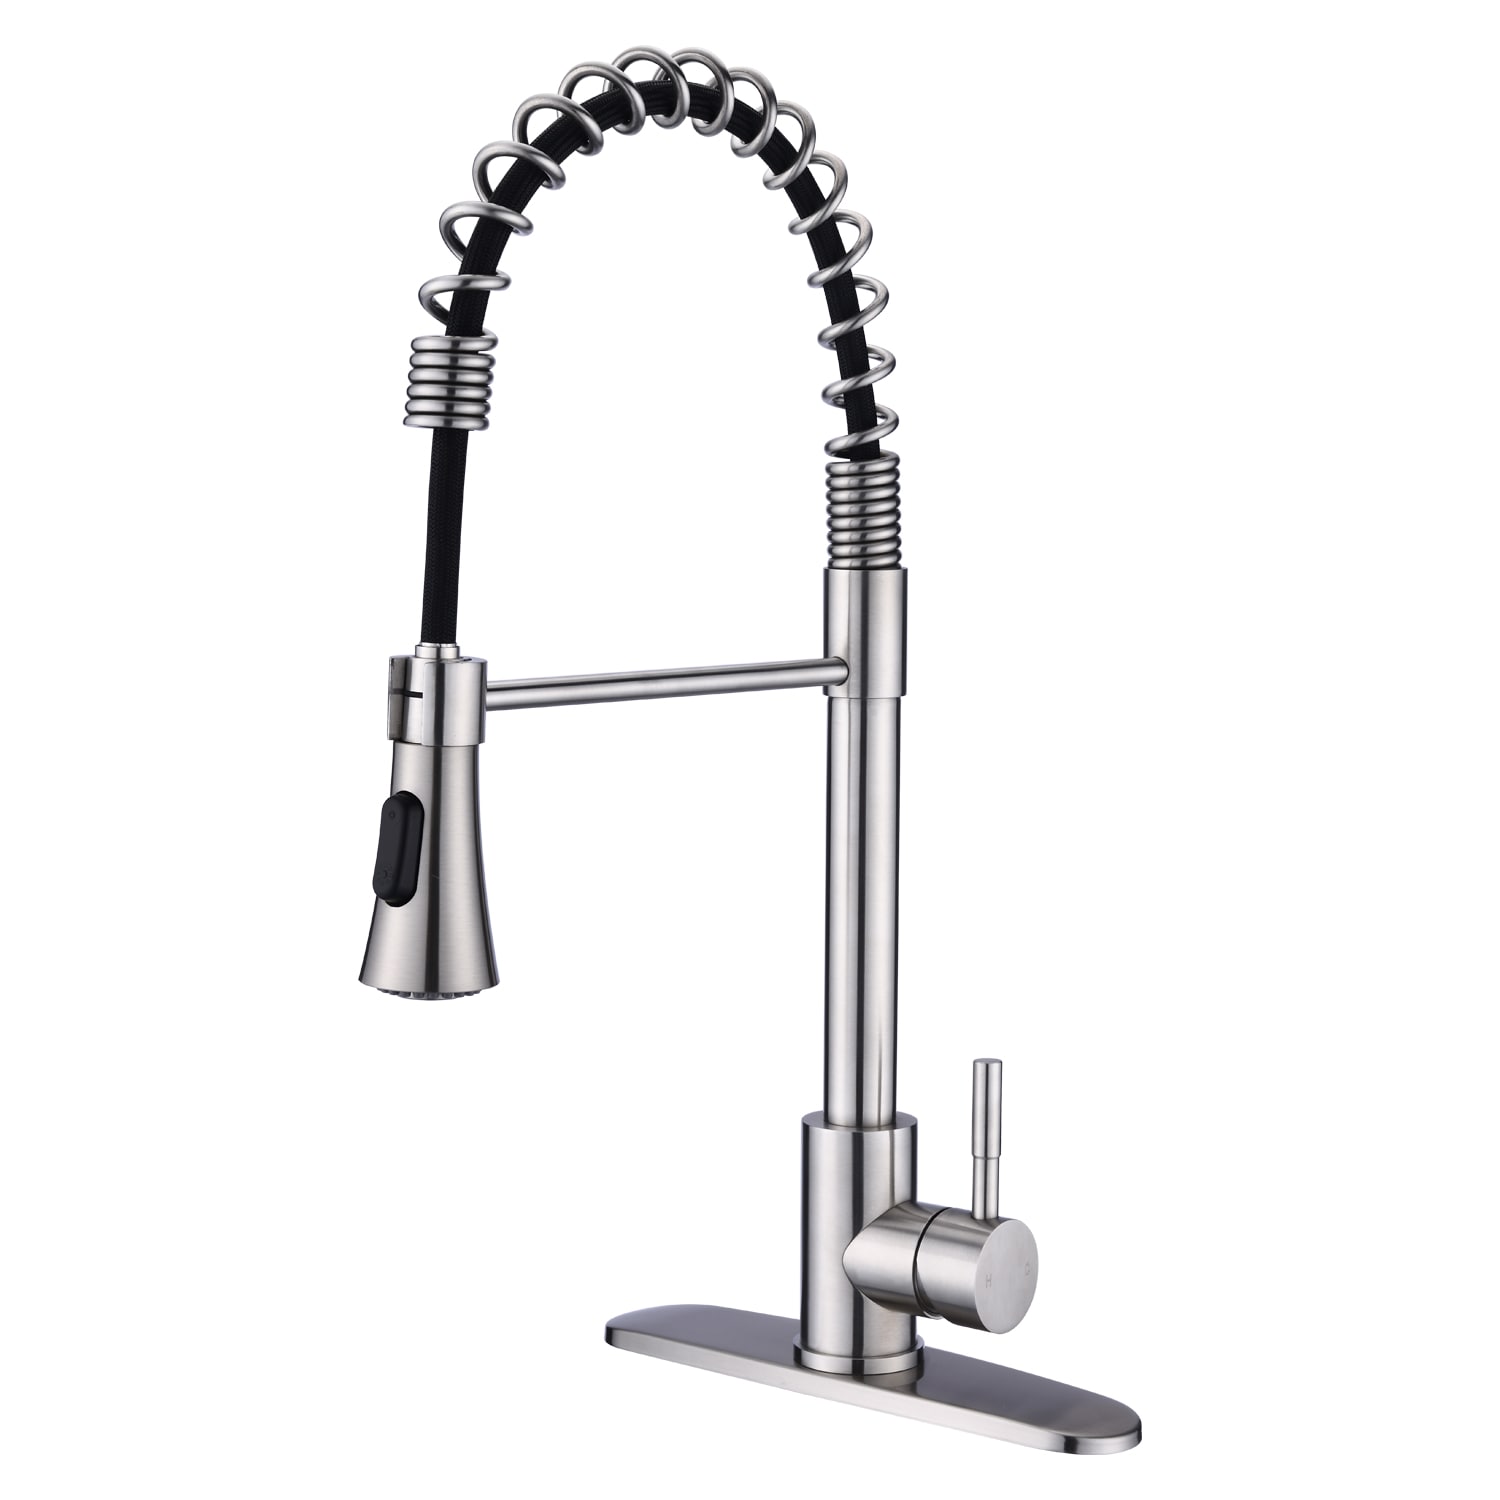 CASAINC Spring sprayer kitchen faucet with deck plate Brushed Nickel Single  Handle Deck mount Pull down Touch Kitchen Faucet